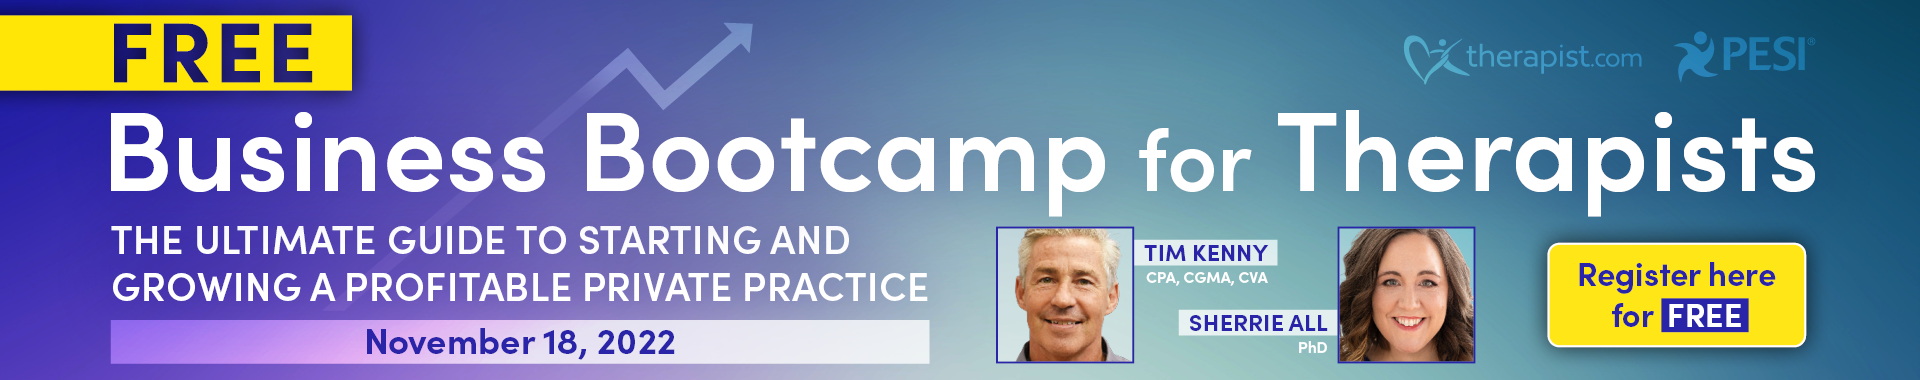 FREE Business Bootcamp for Therapists: The Ultimate Guide to Starting and Growing a Profitable Private Practice